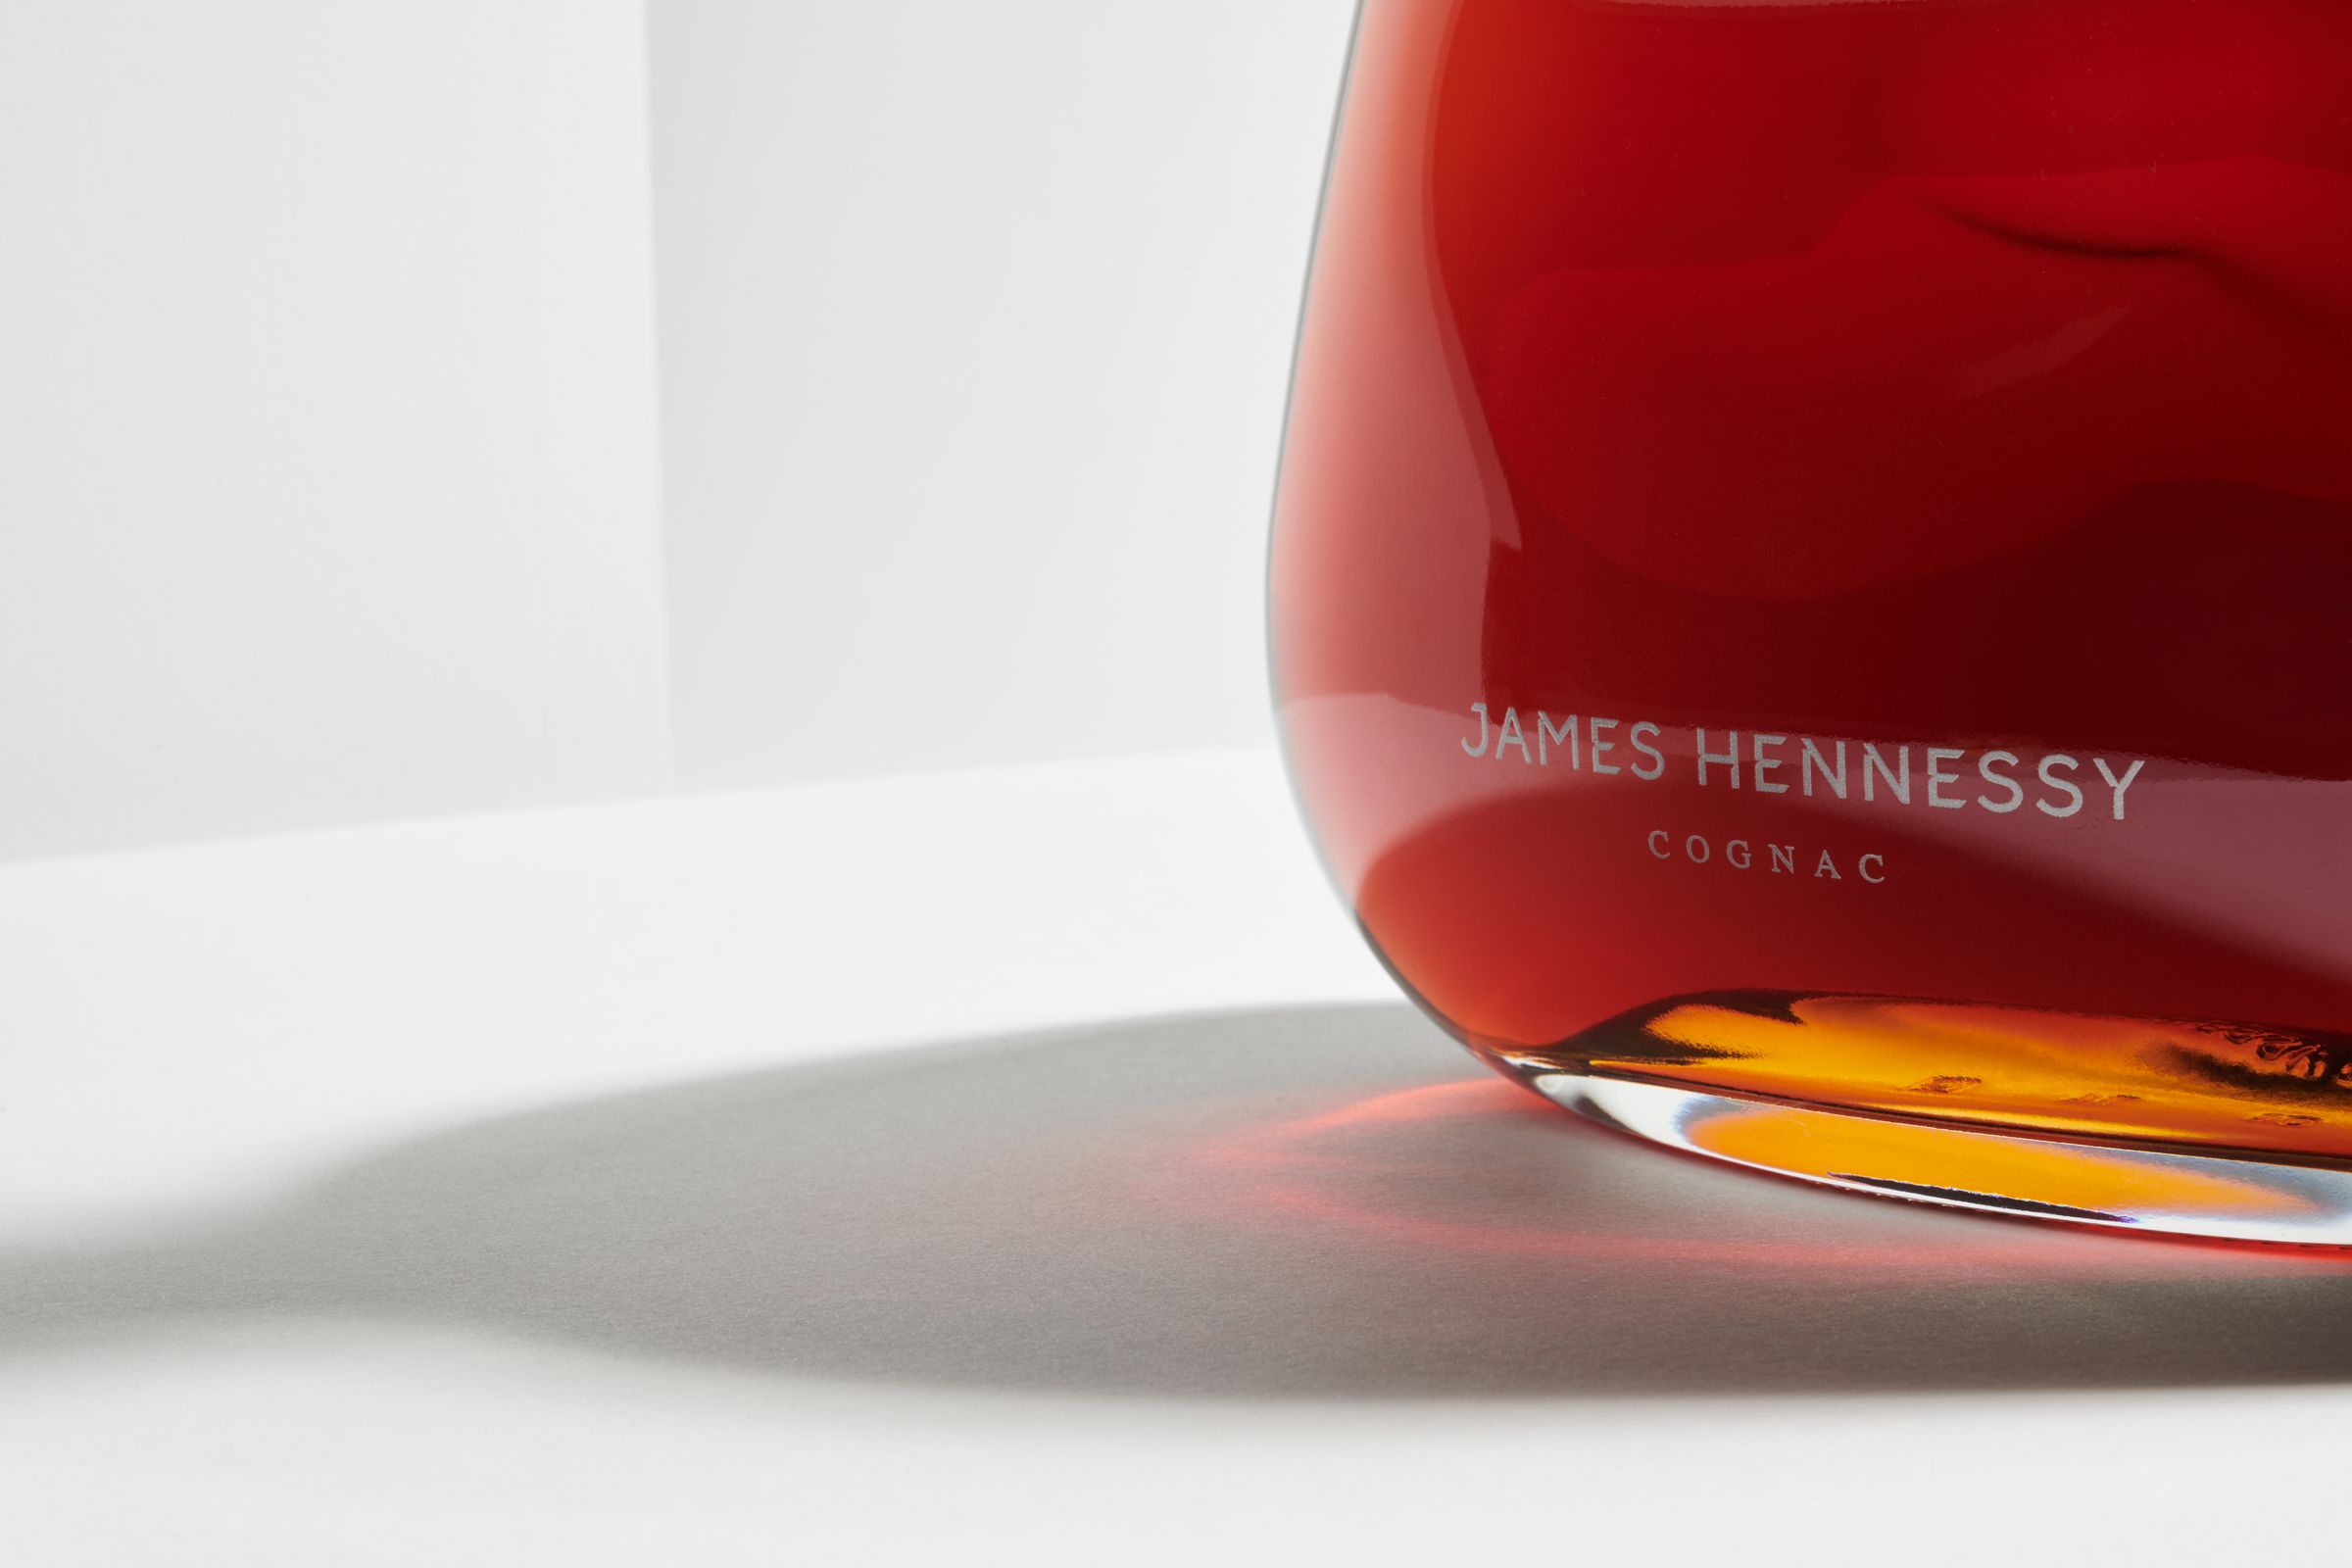 James Hennessy logo applied to bottle